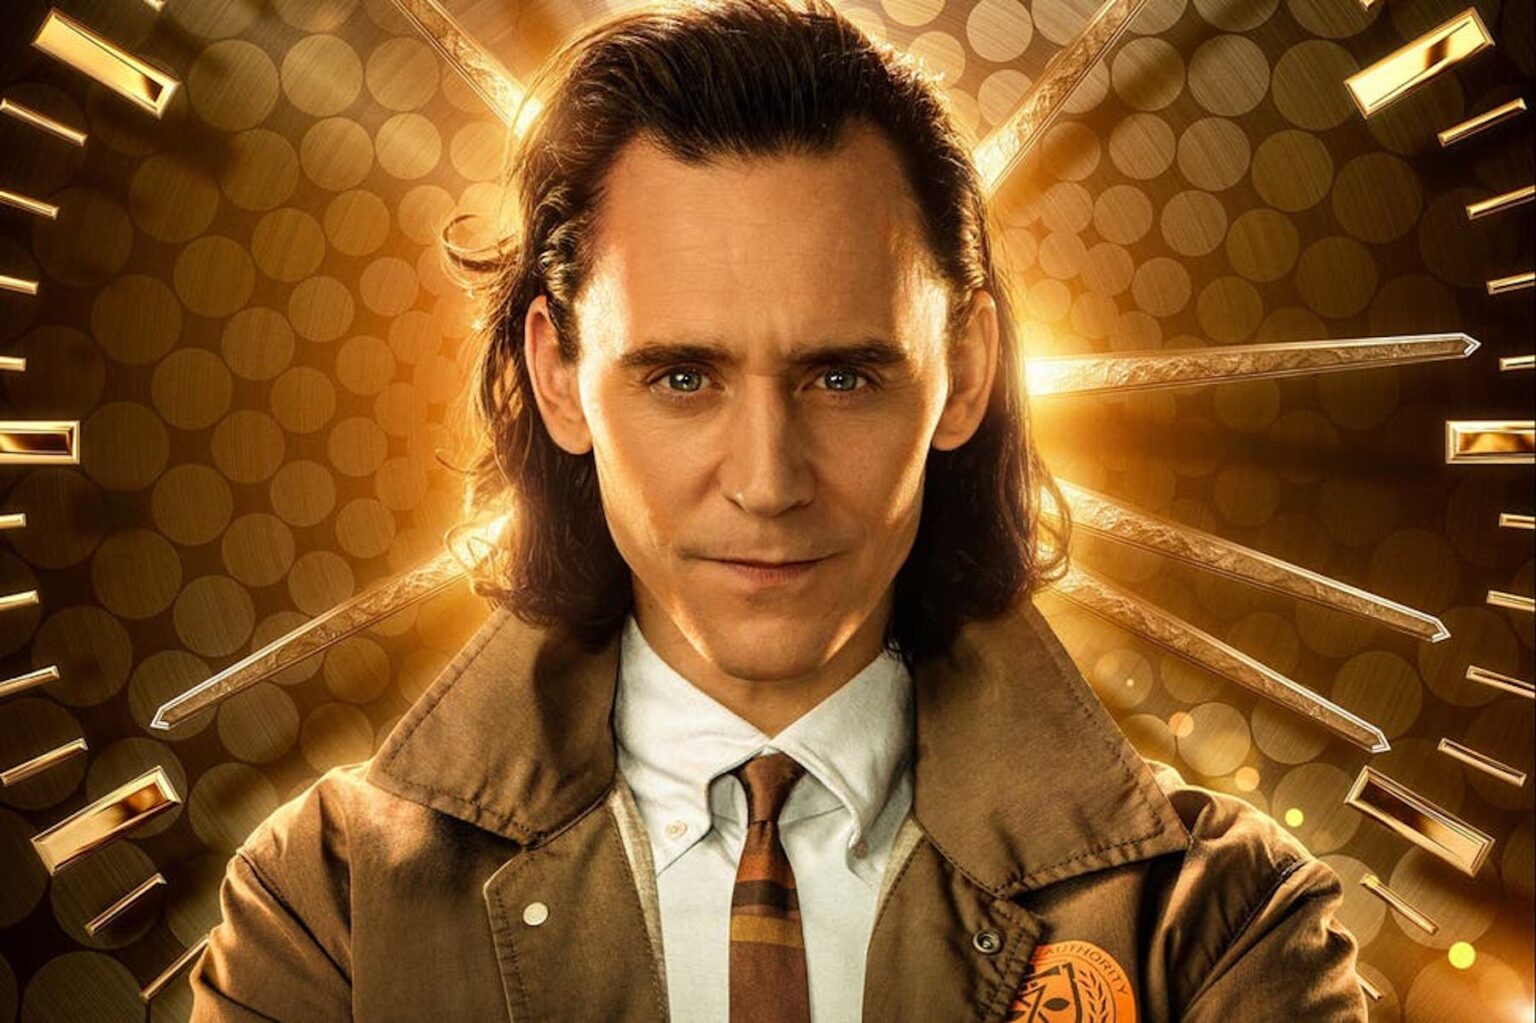 After 'Loki' wraps up, will actor Tom Hiddleston leave the MCU? Get up to some mischief to see why that's not the case.